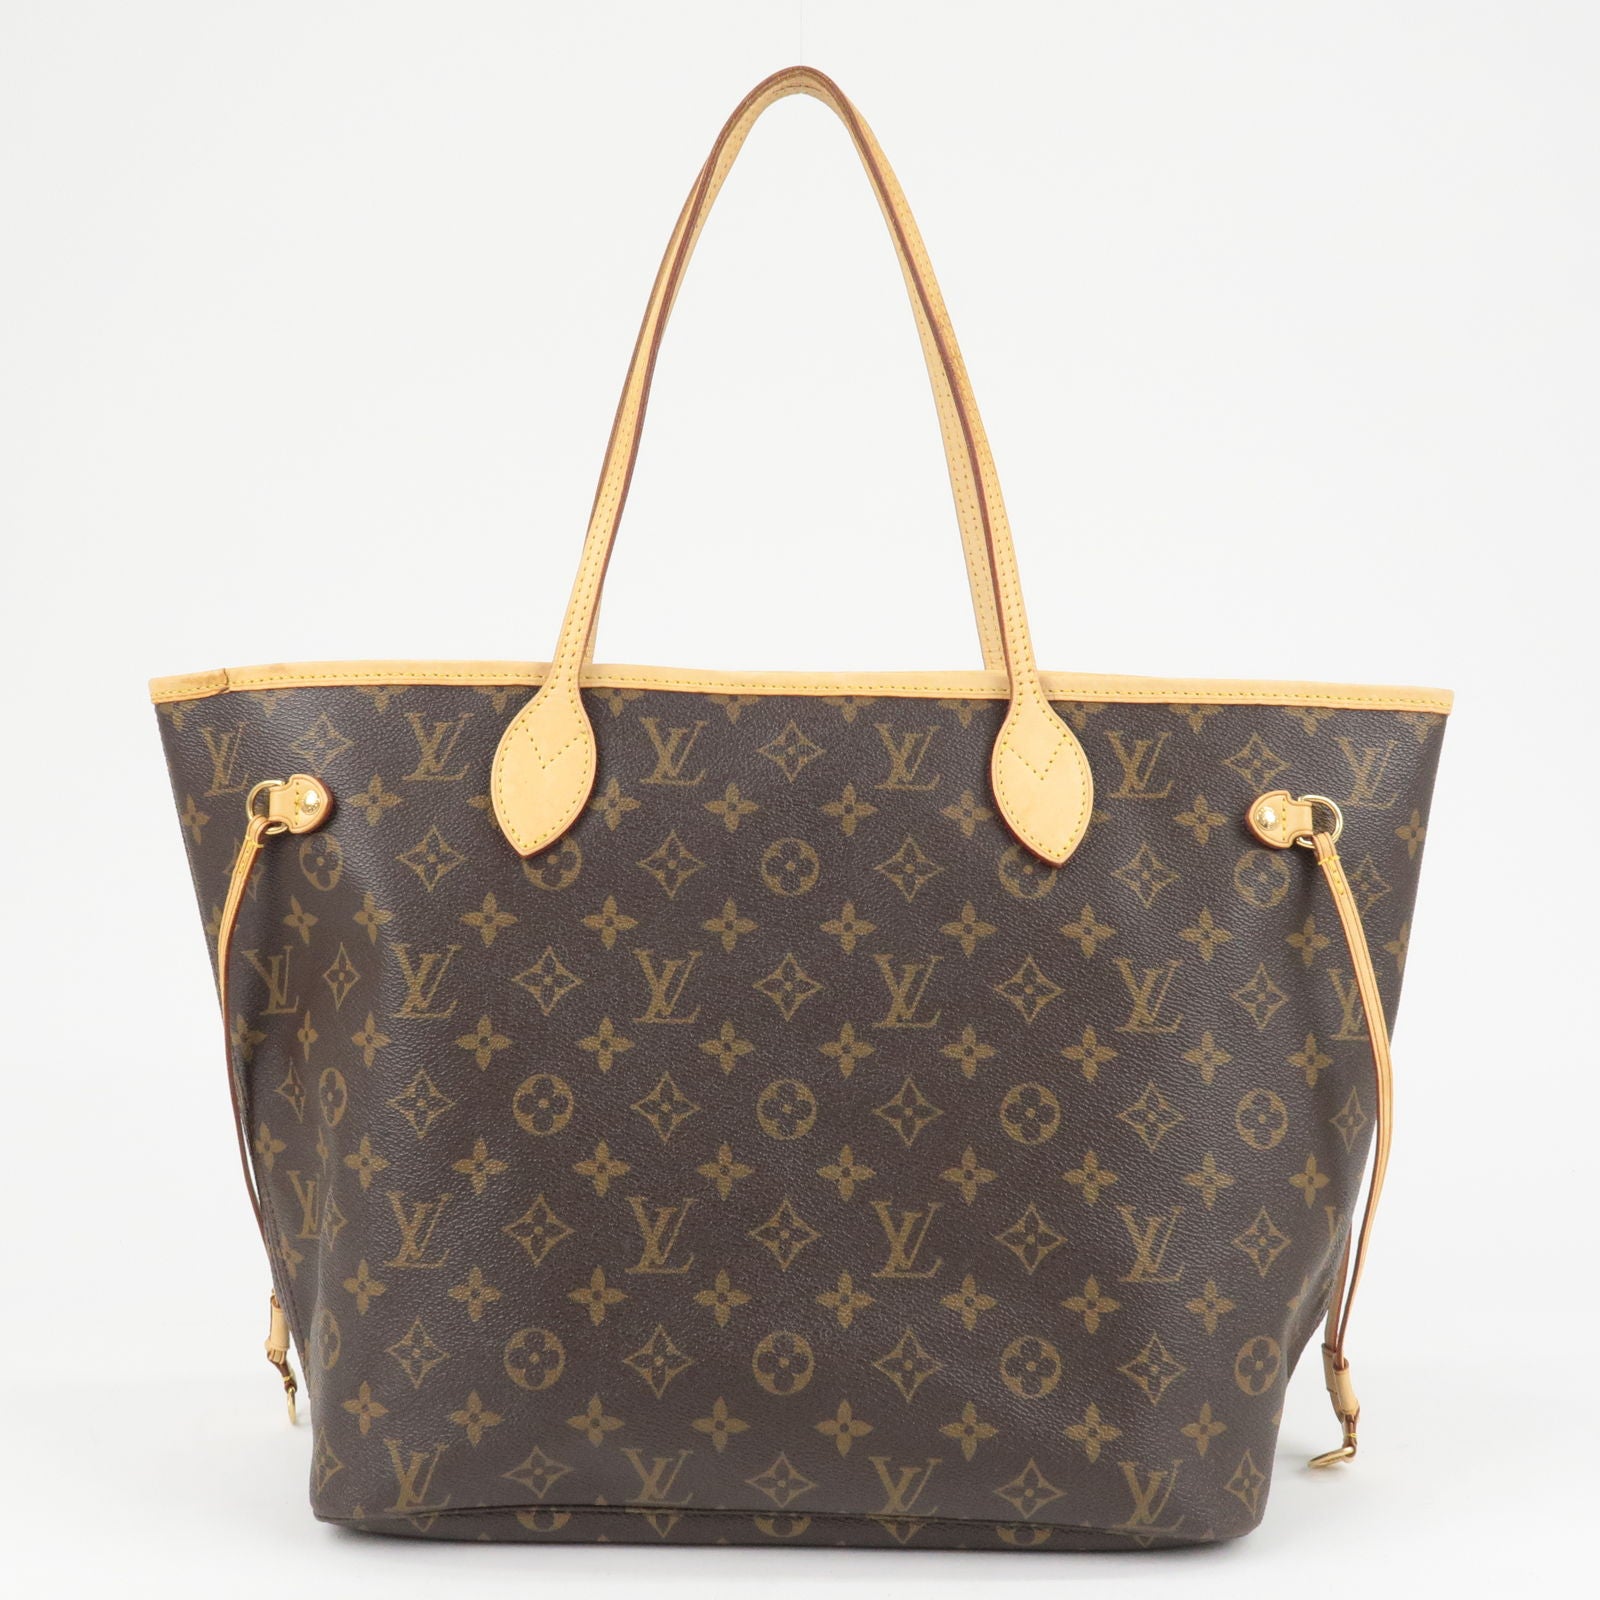 Price increase up on the Japanese site, Neverfull increased by 20